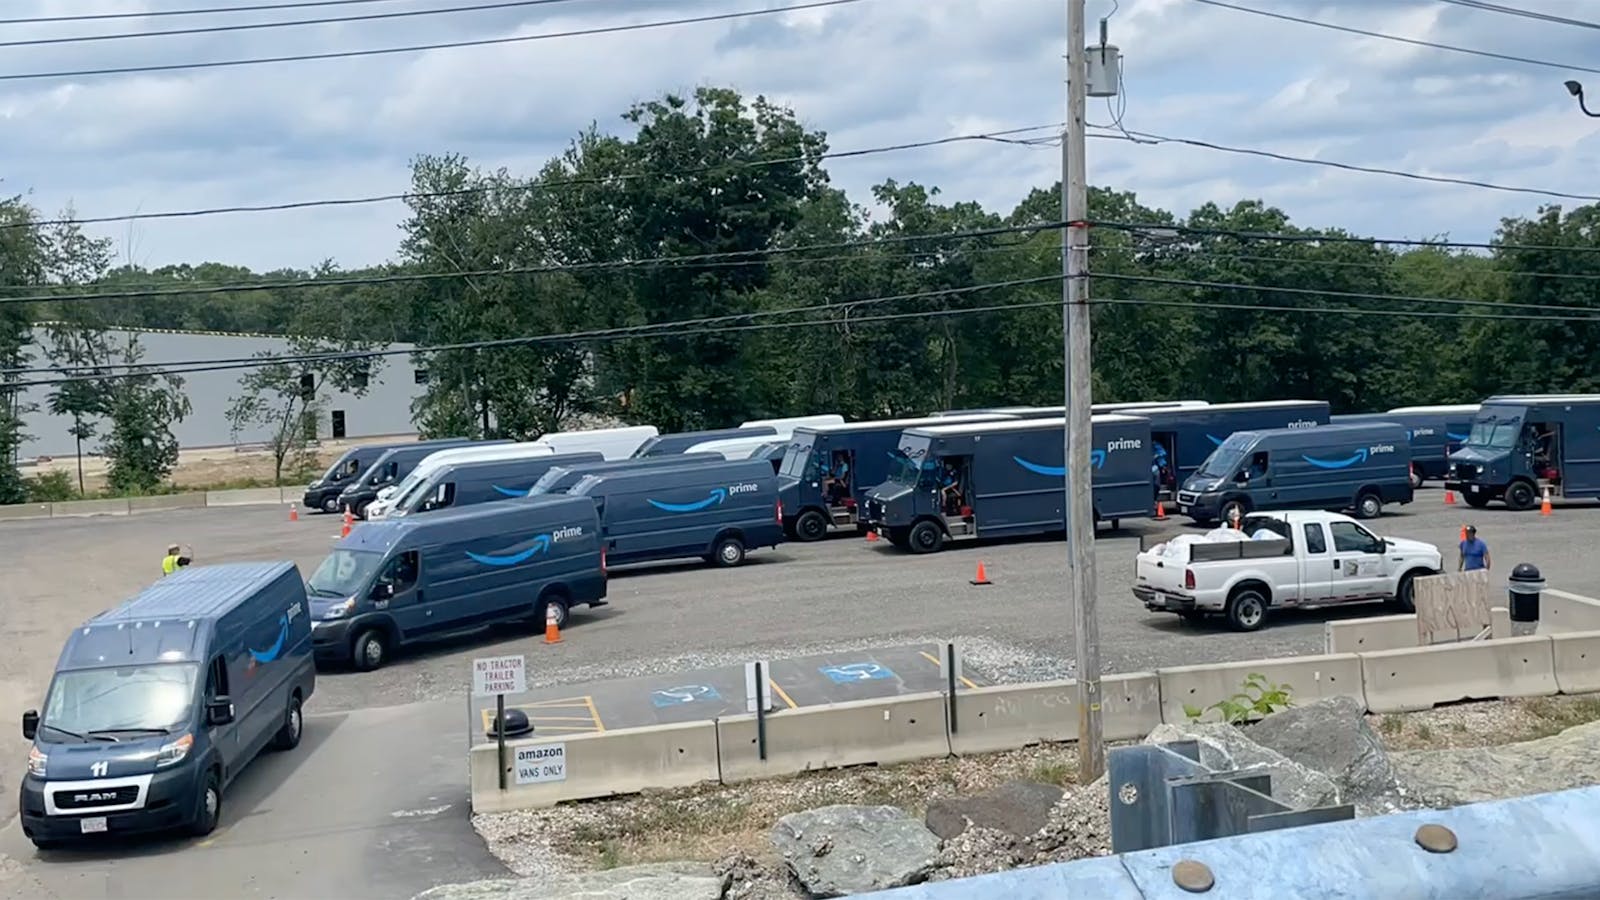 Amazon vans departing a new staging lot outside an Amazon delivery station in Milford, Mass. Photo by Paris Martineau